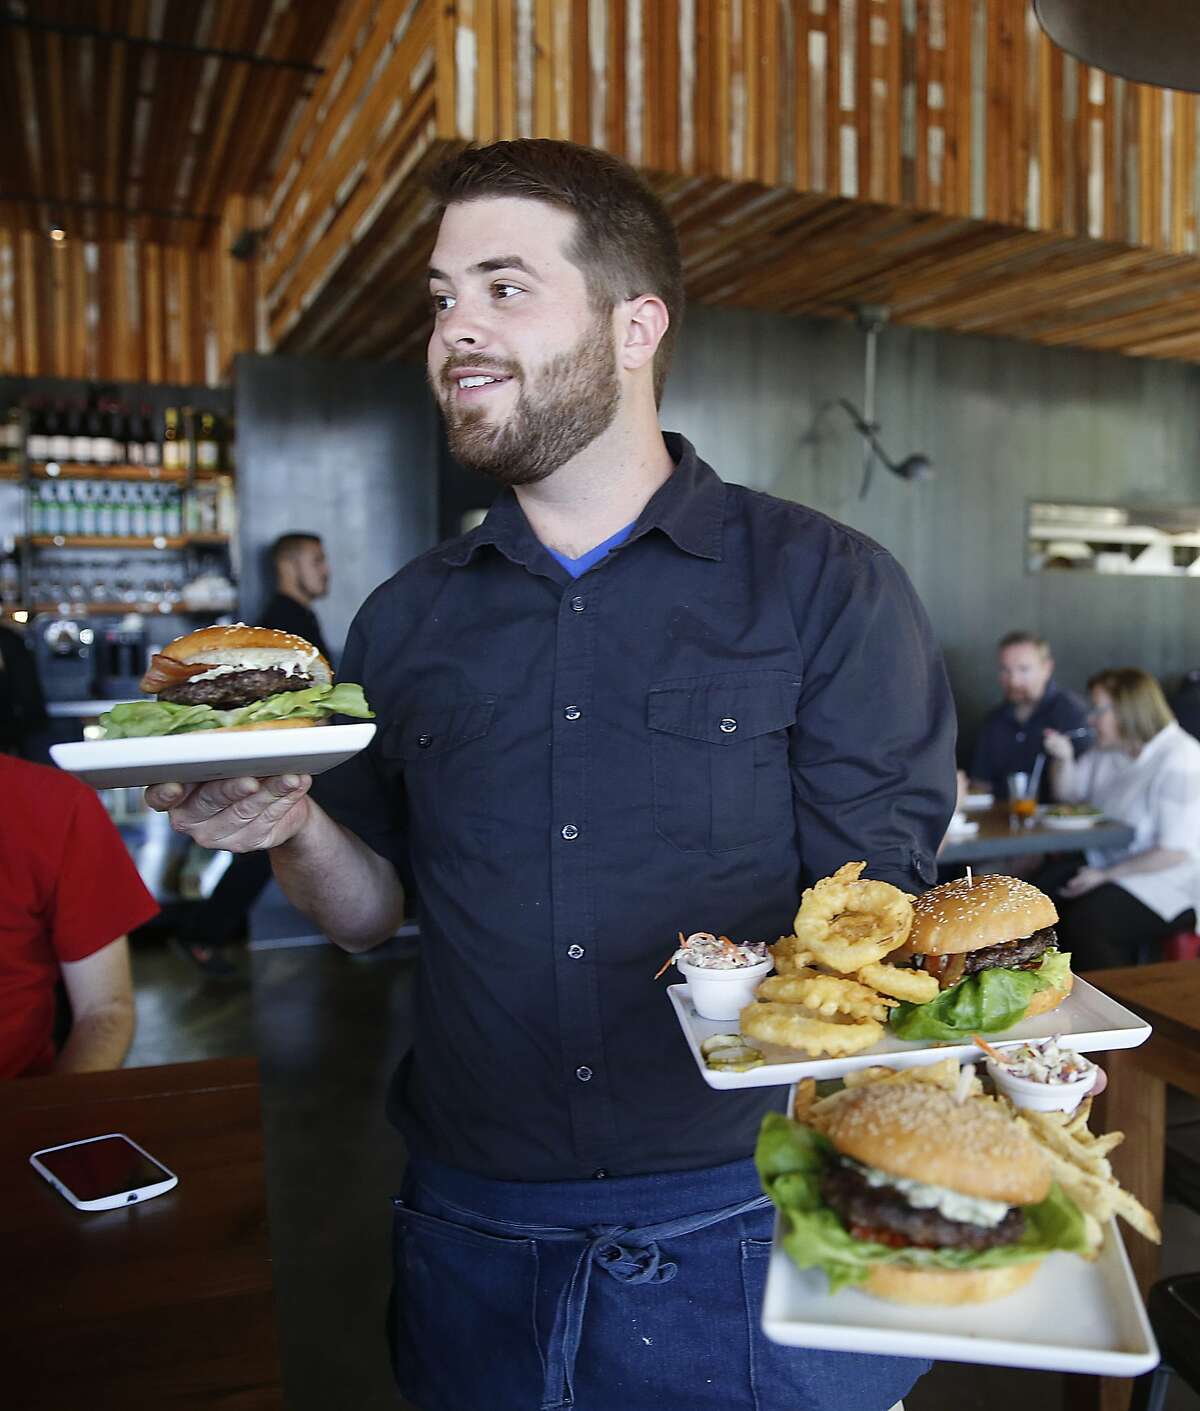 Burgers served during lunch at the Bureau 510 in Emeryville, Calif., on Tuesday, June 23, 2015.